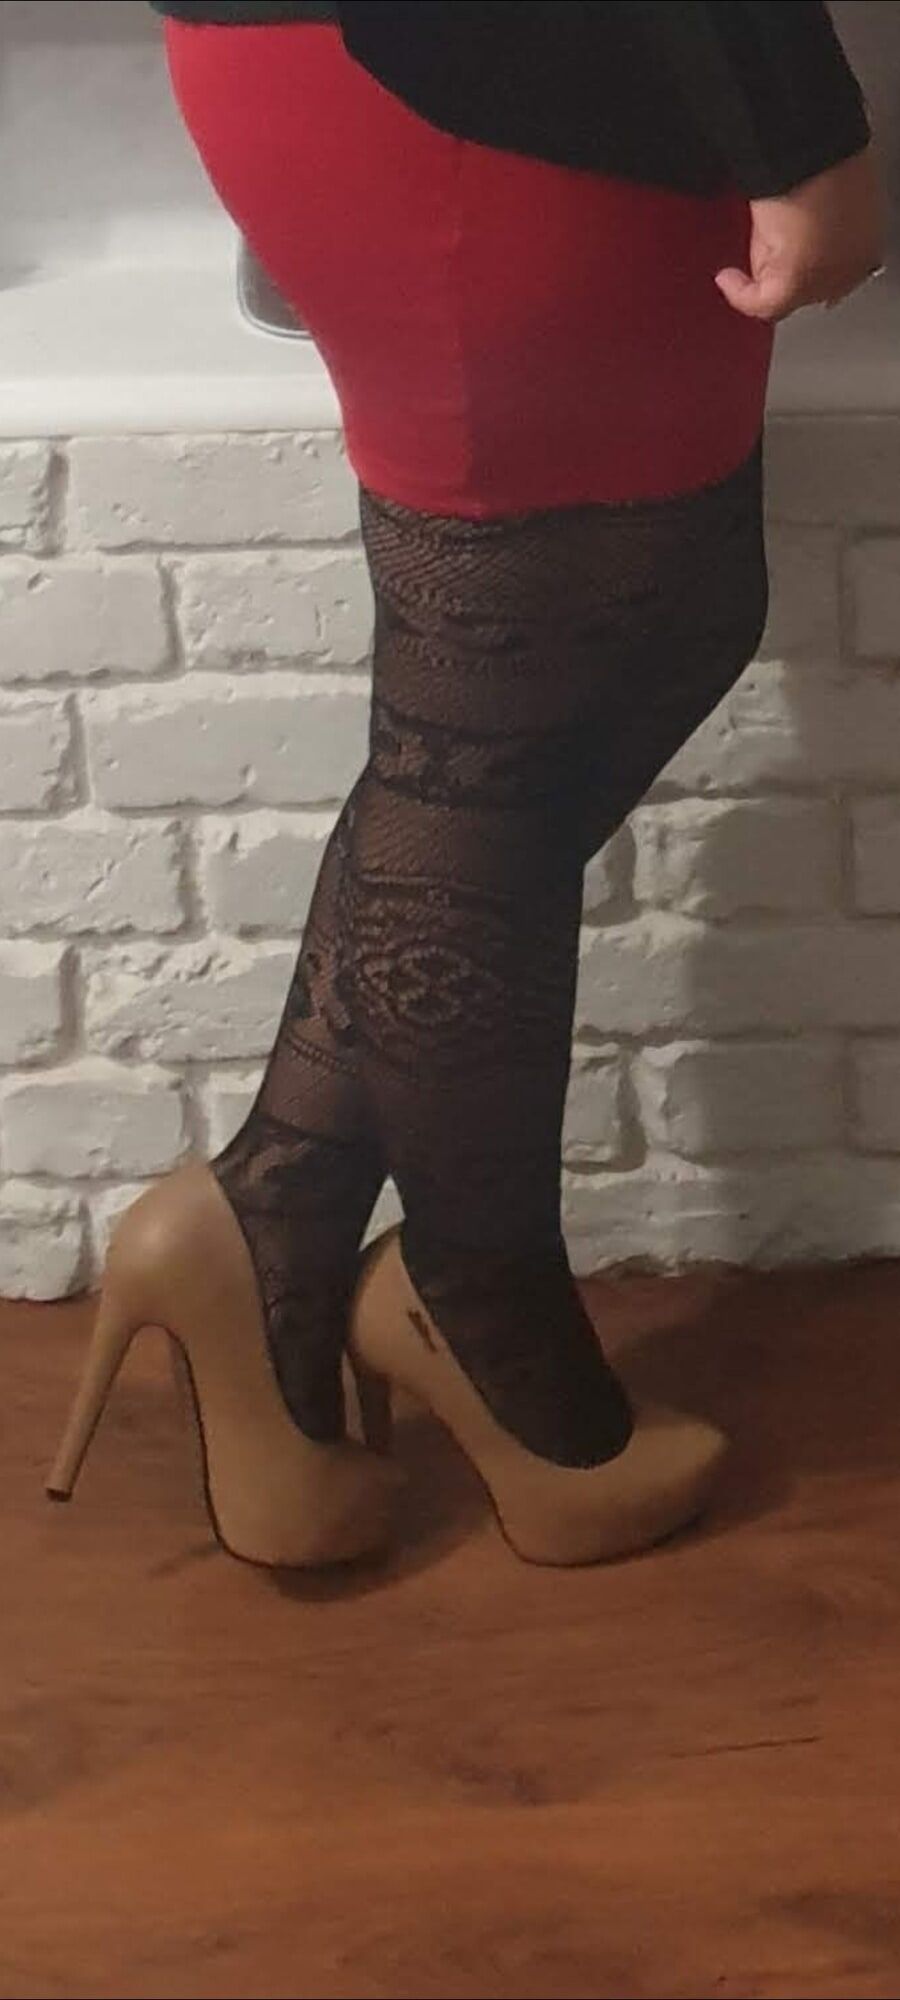 Some of my heels and stockings #18